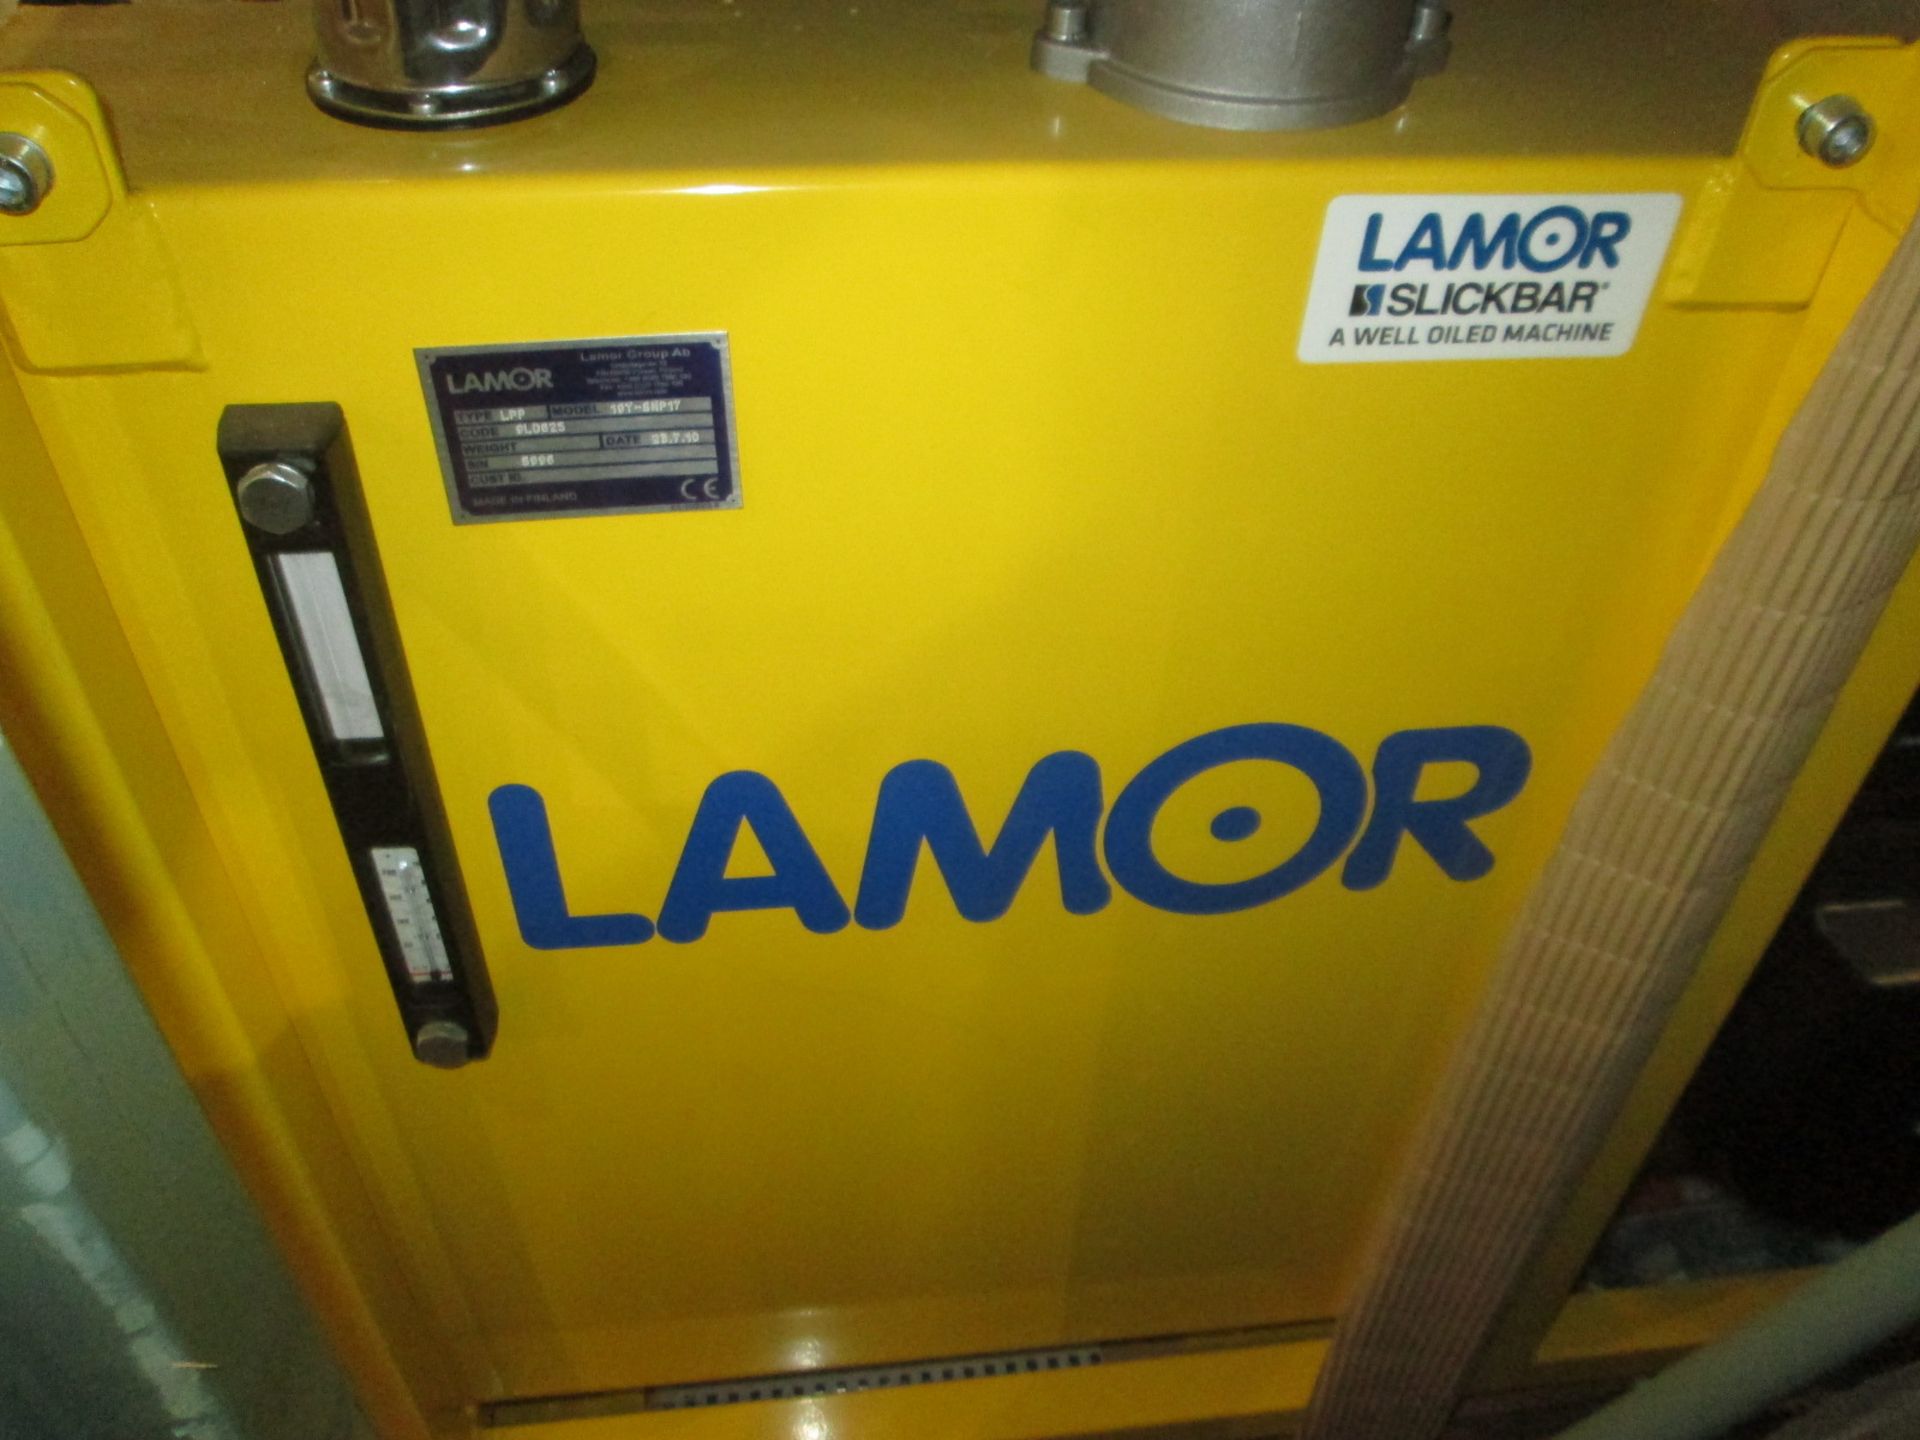 LAMOR SLICKBAR LPP 19 ENCLOSED HYDRAULIC POWER PACK WITH LOMBARDINI DIESEL ENGINE AND ELECTRIC START - Image 2 of 3